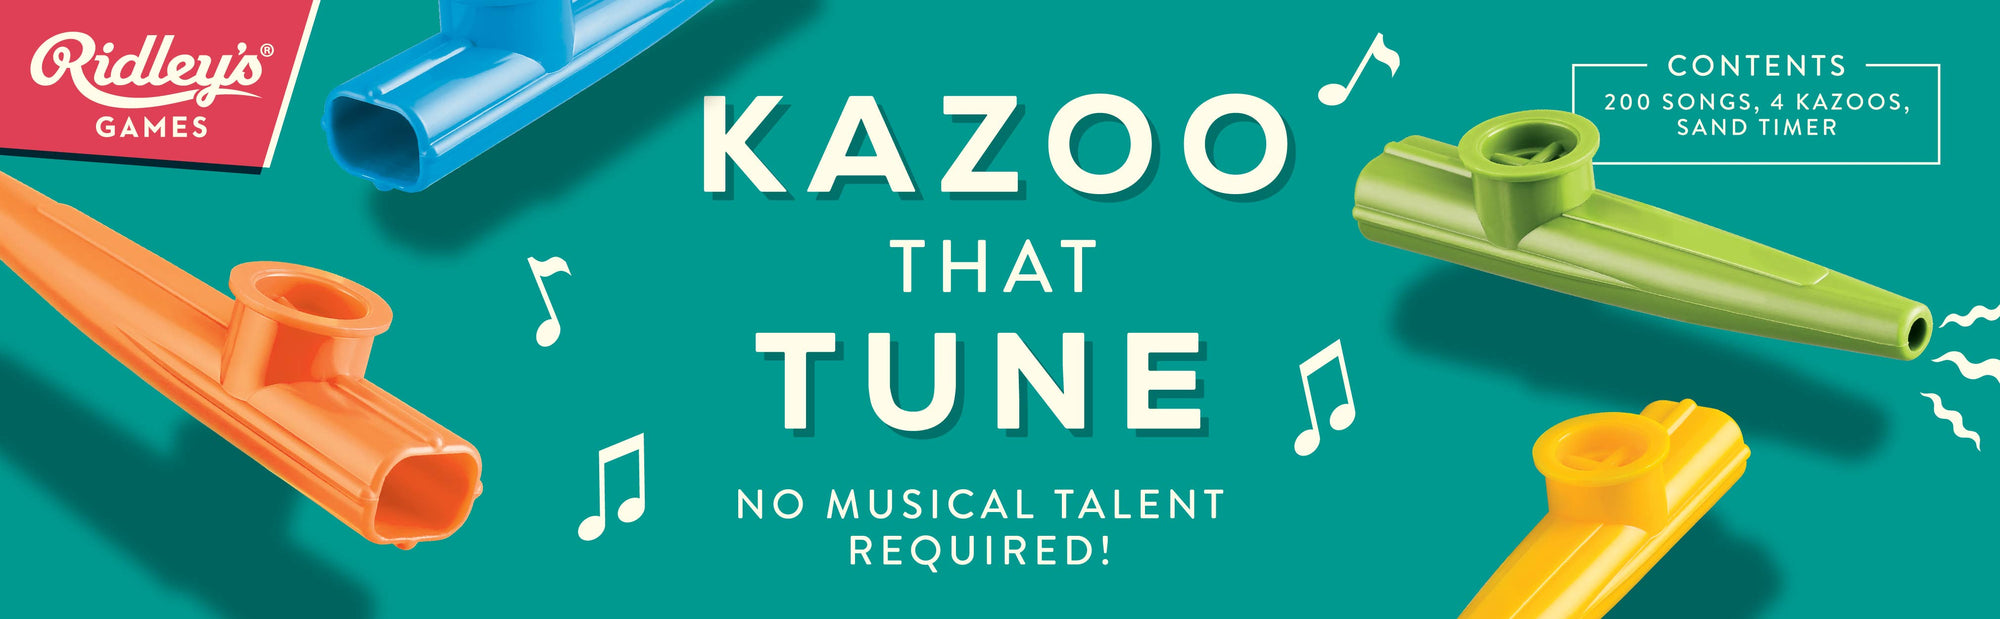 Ridley's Games presents the Kazoo That Tune - a kazoo-powered activity where no musical skills are required.